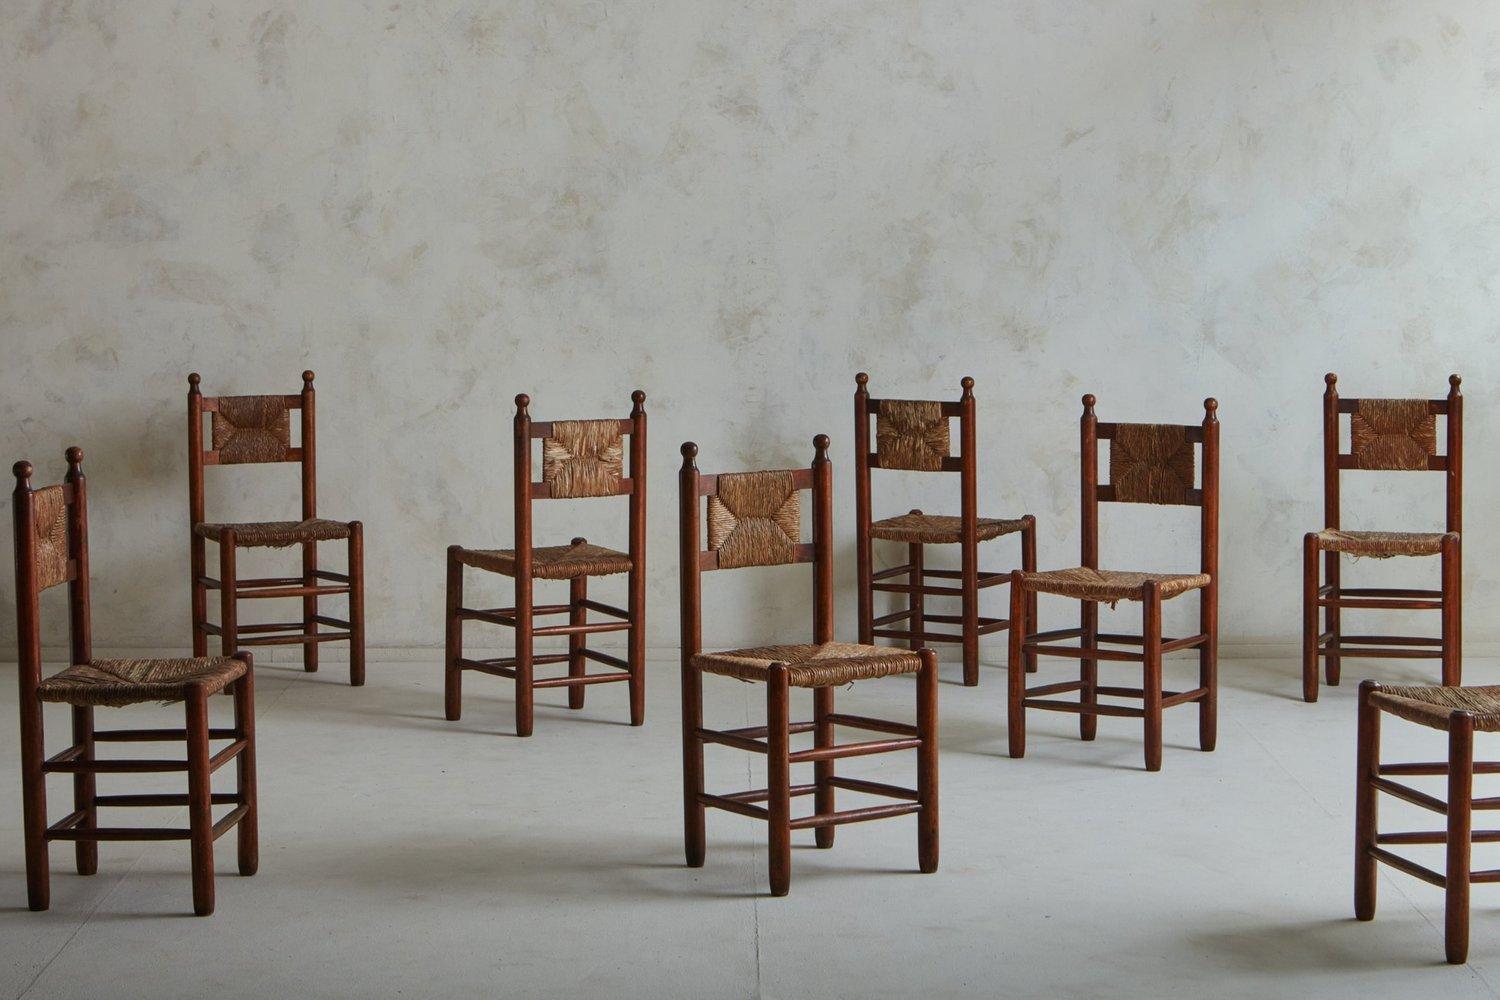 A set of 8 French 1940s dining chairs in the style of Charles Dudouyt. These chairs feature stained wood frames with circular finials and double stretcher details. They have woven rush seats and backs. Unmarked. Sourced in France, 1940s.